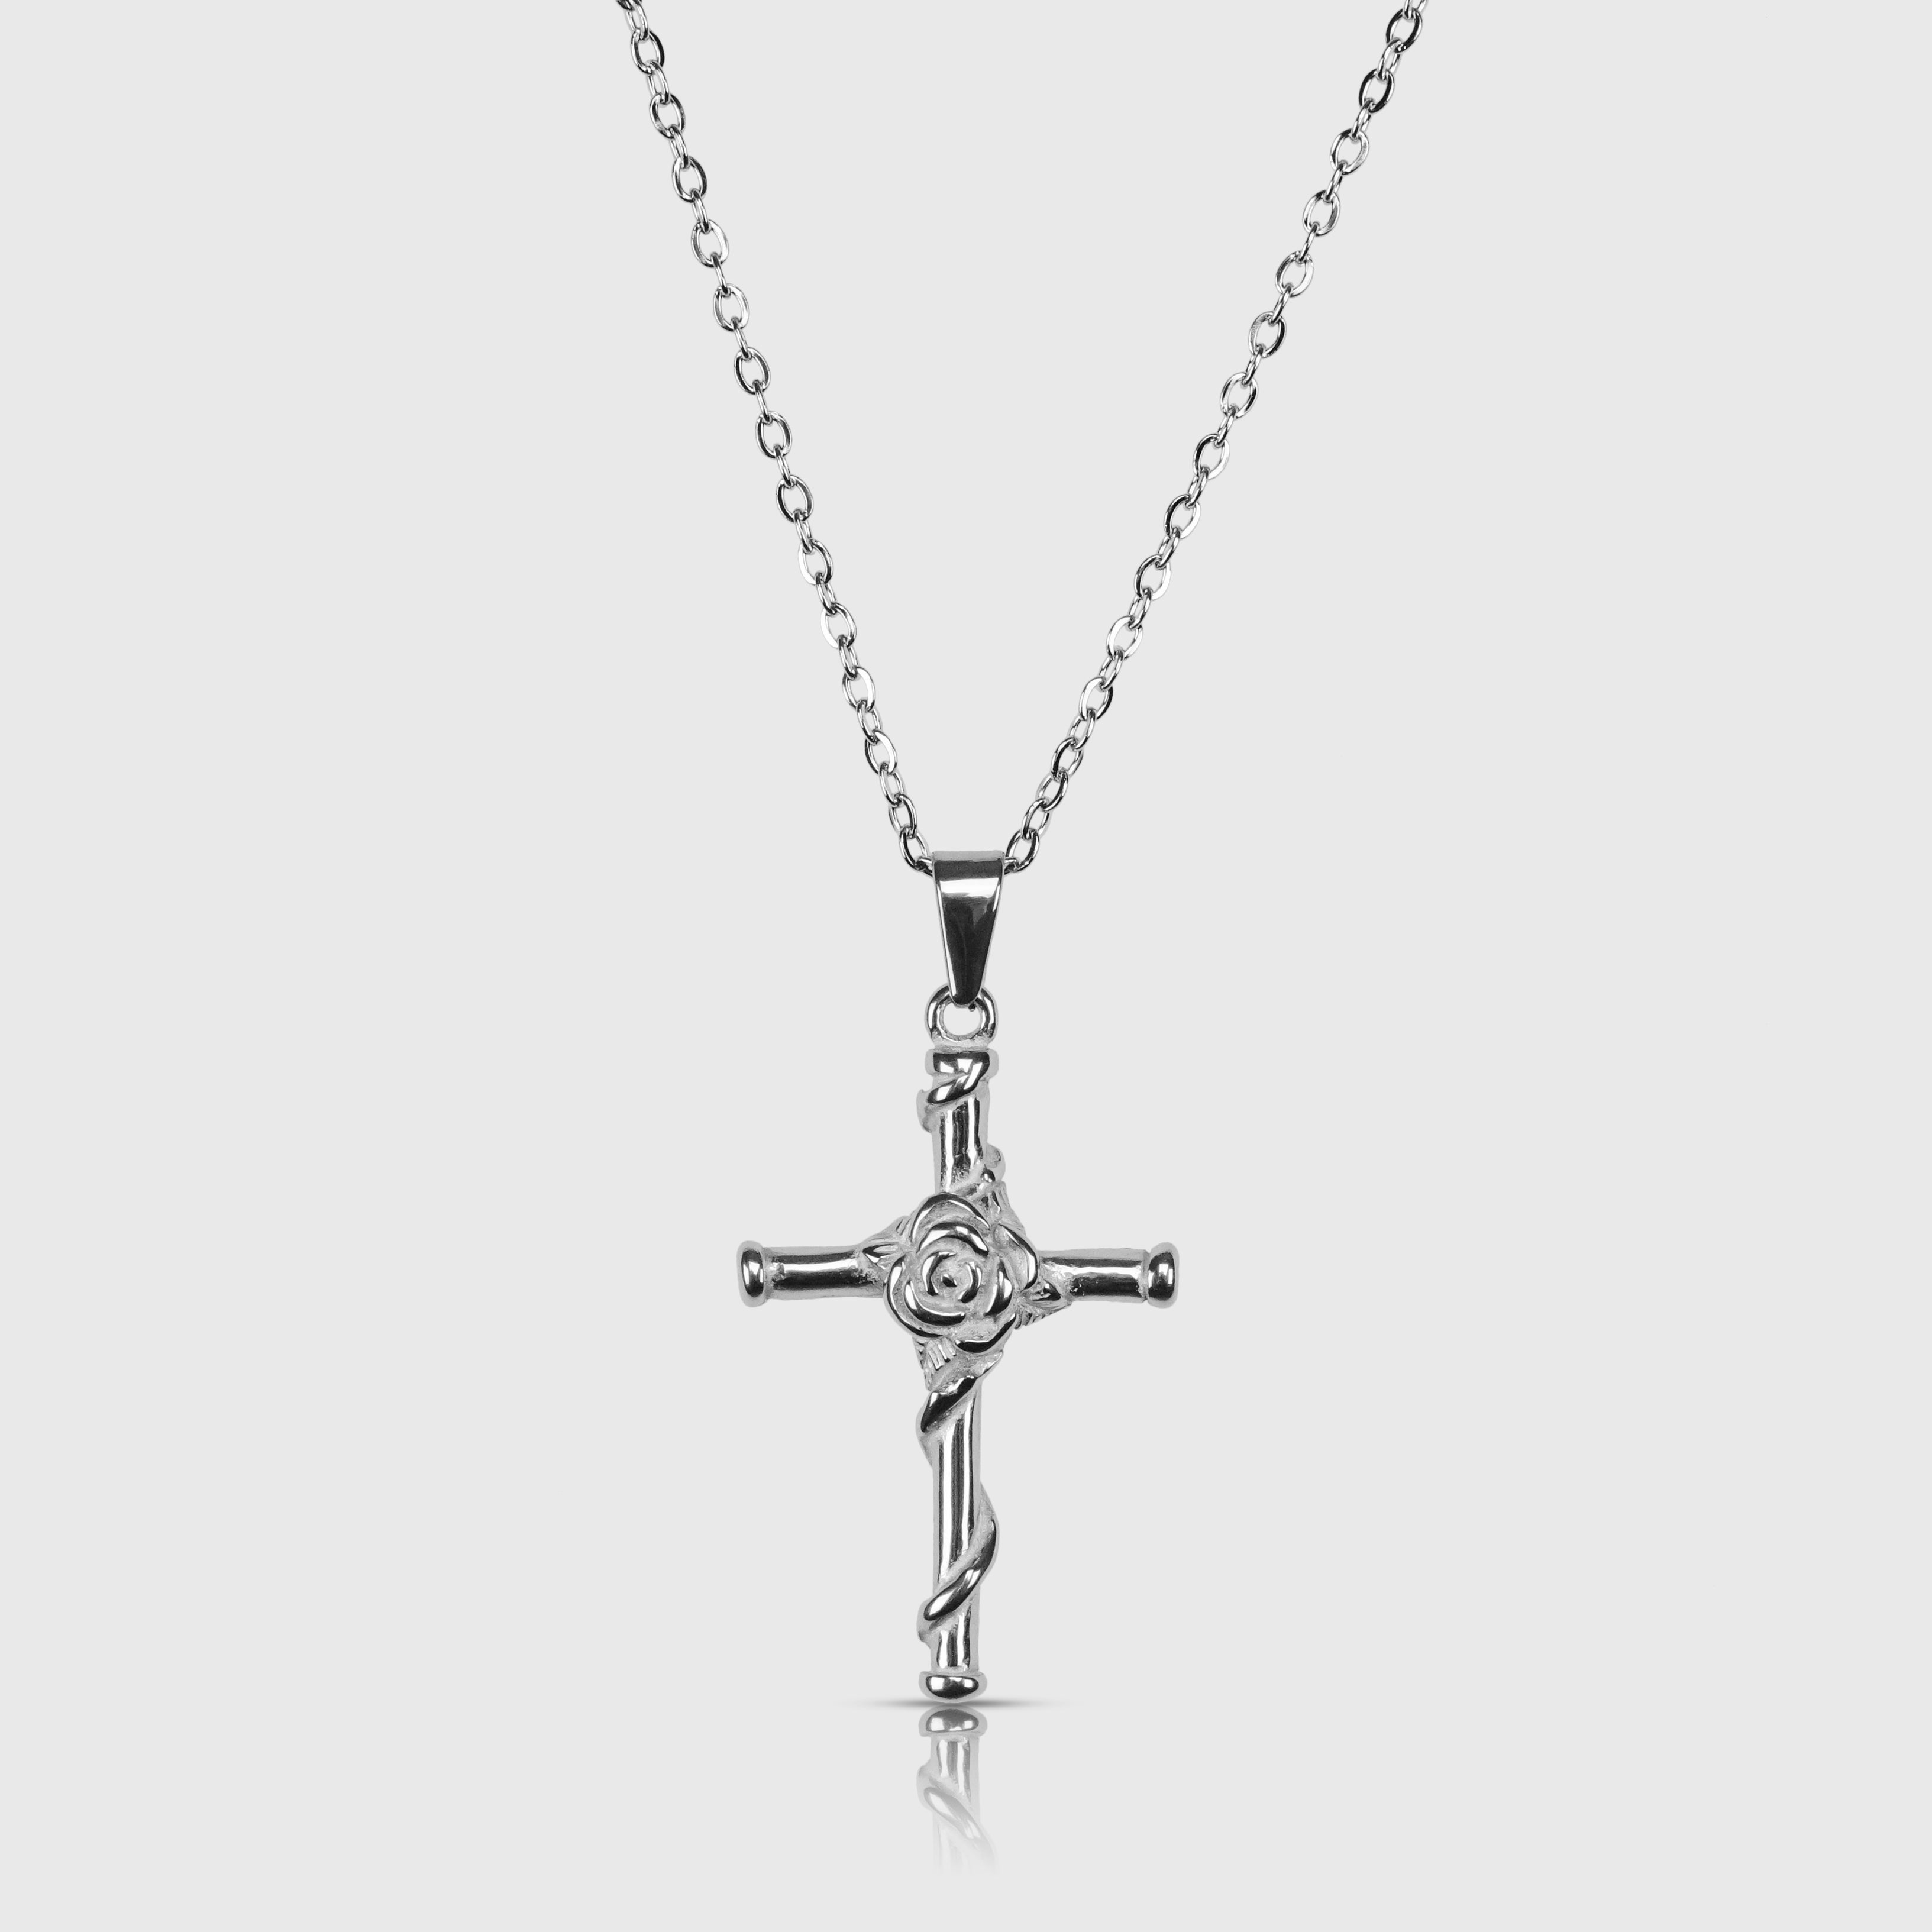 ROSE CROSS NECKLACE - SILVER